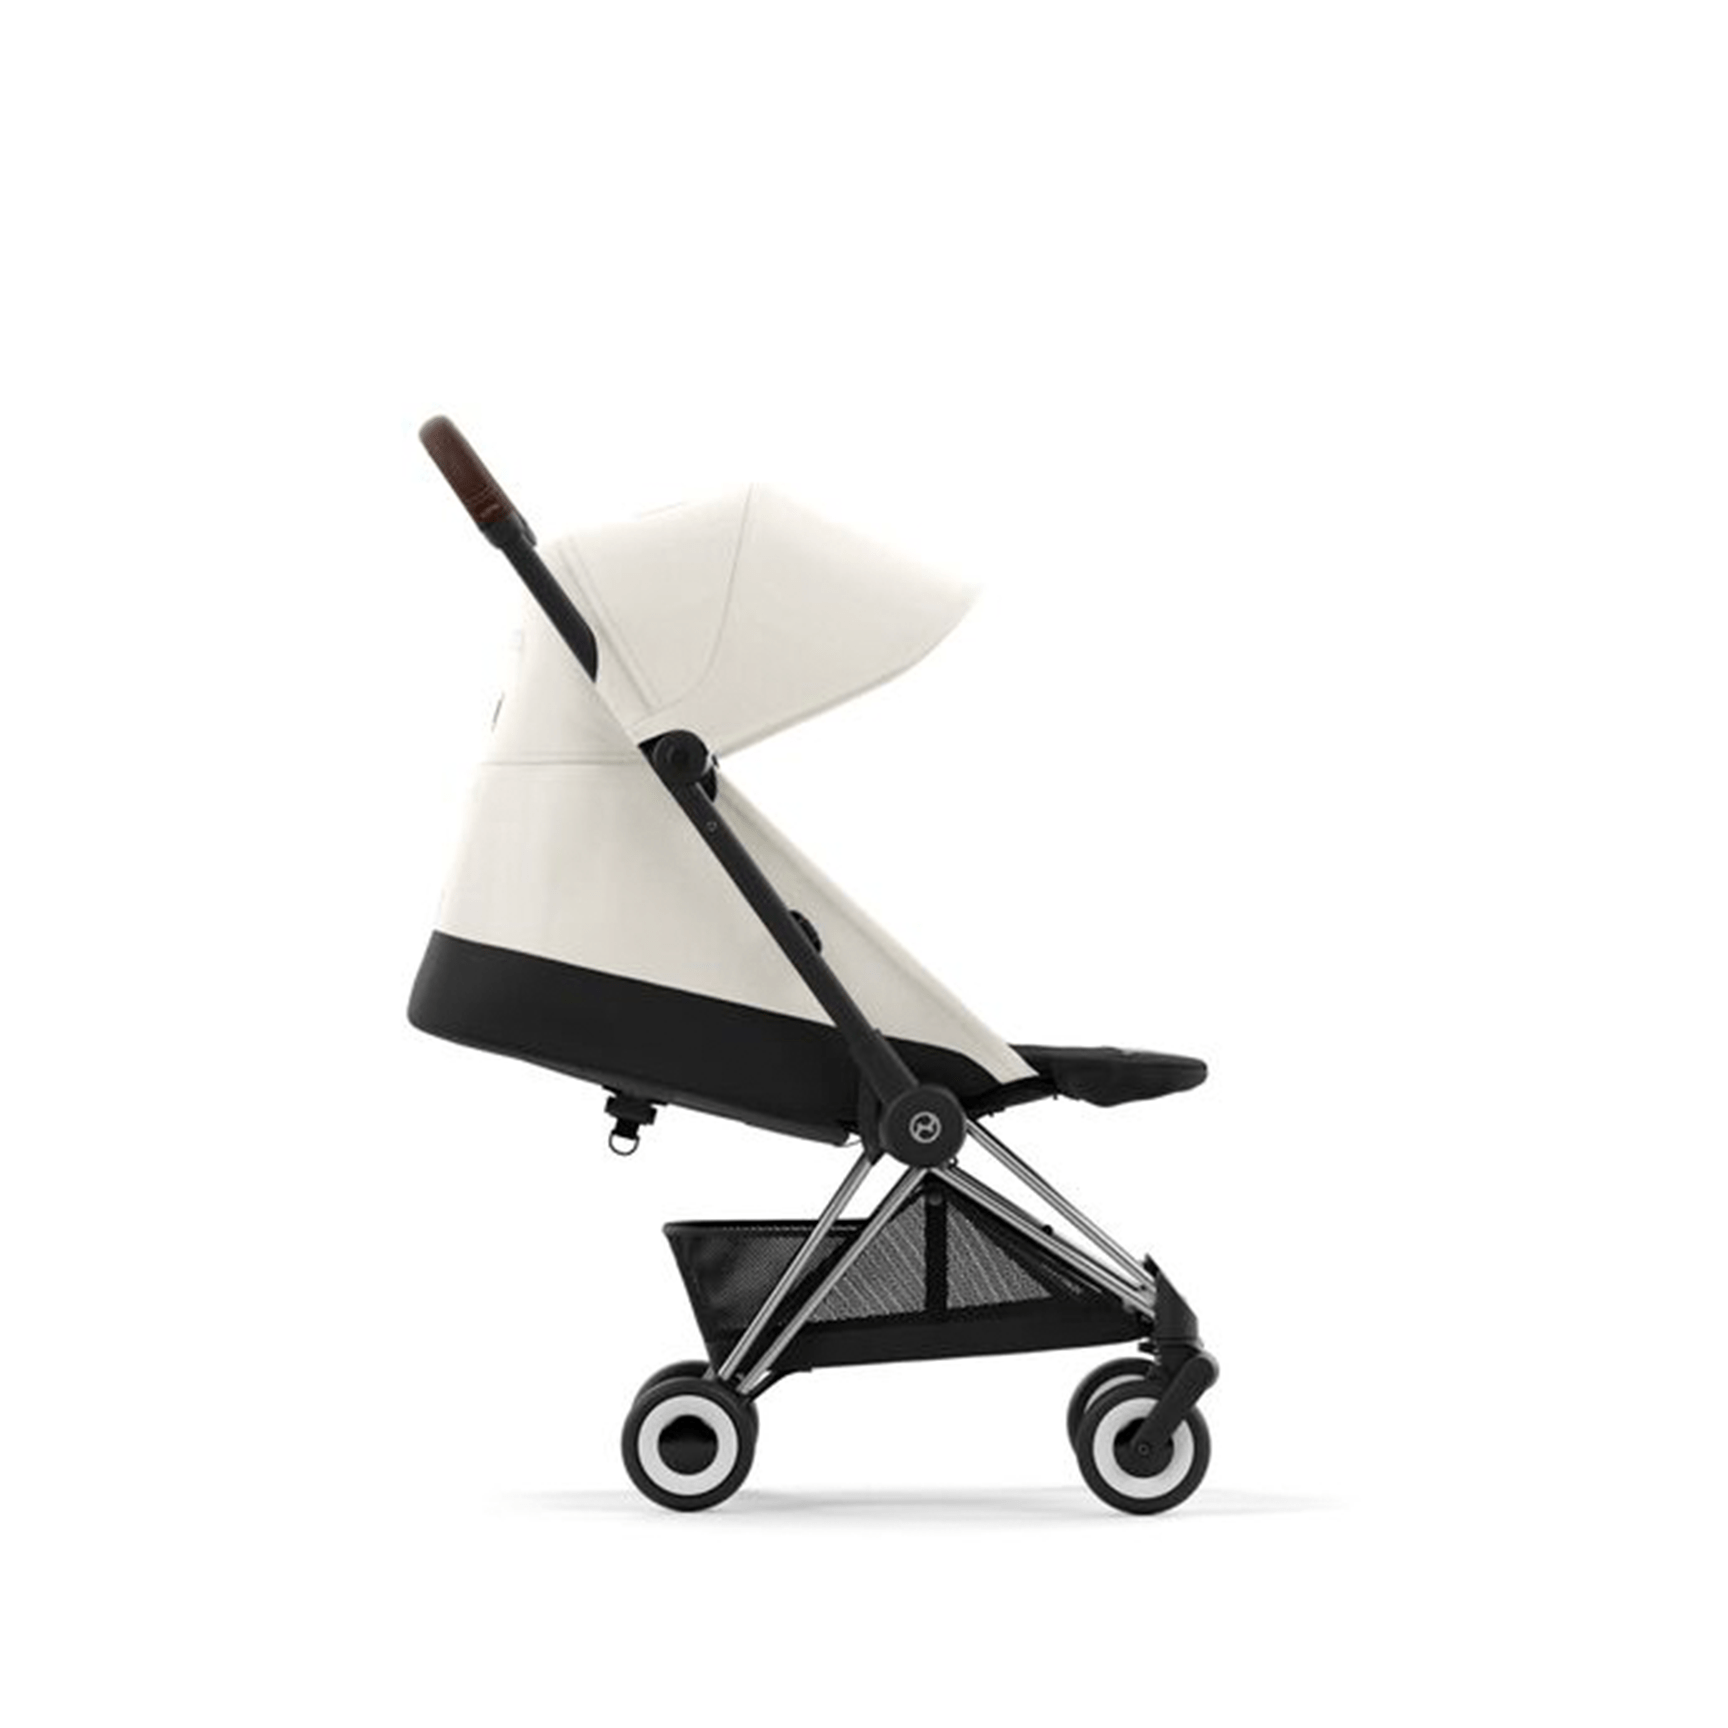 Cybex COYA in Chrome Off White Pushchairs & Buggies 522004407 4063846387700